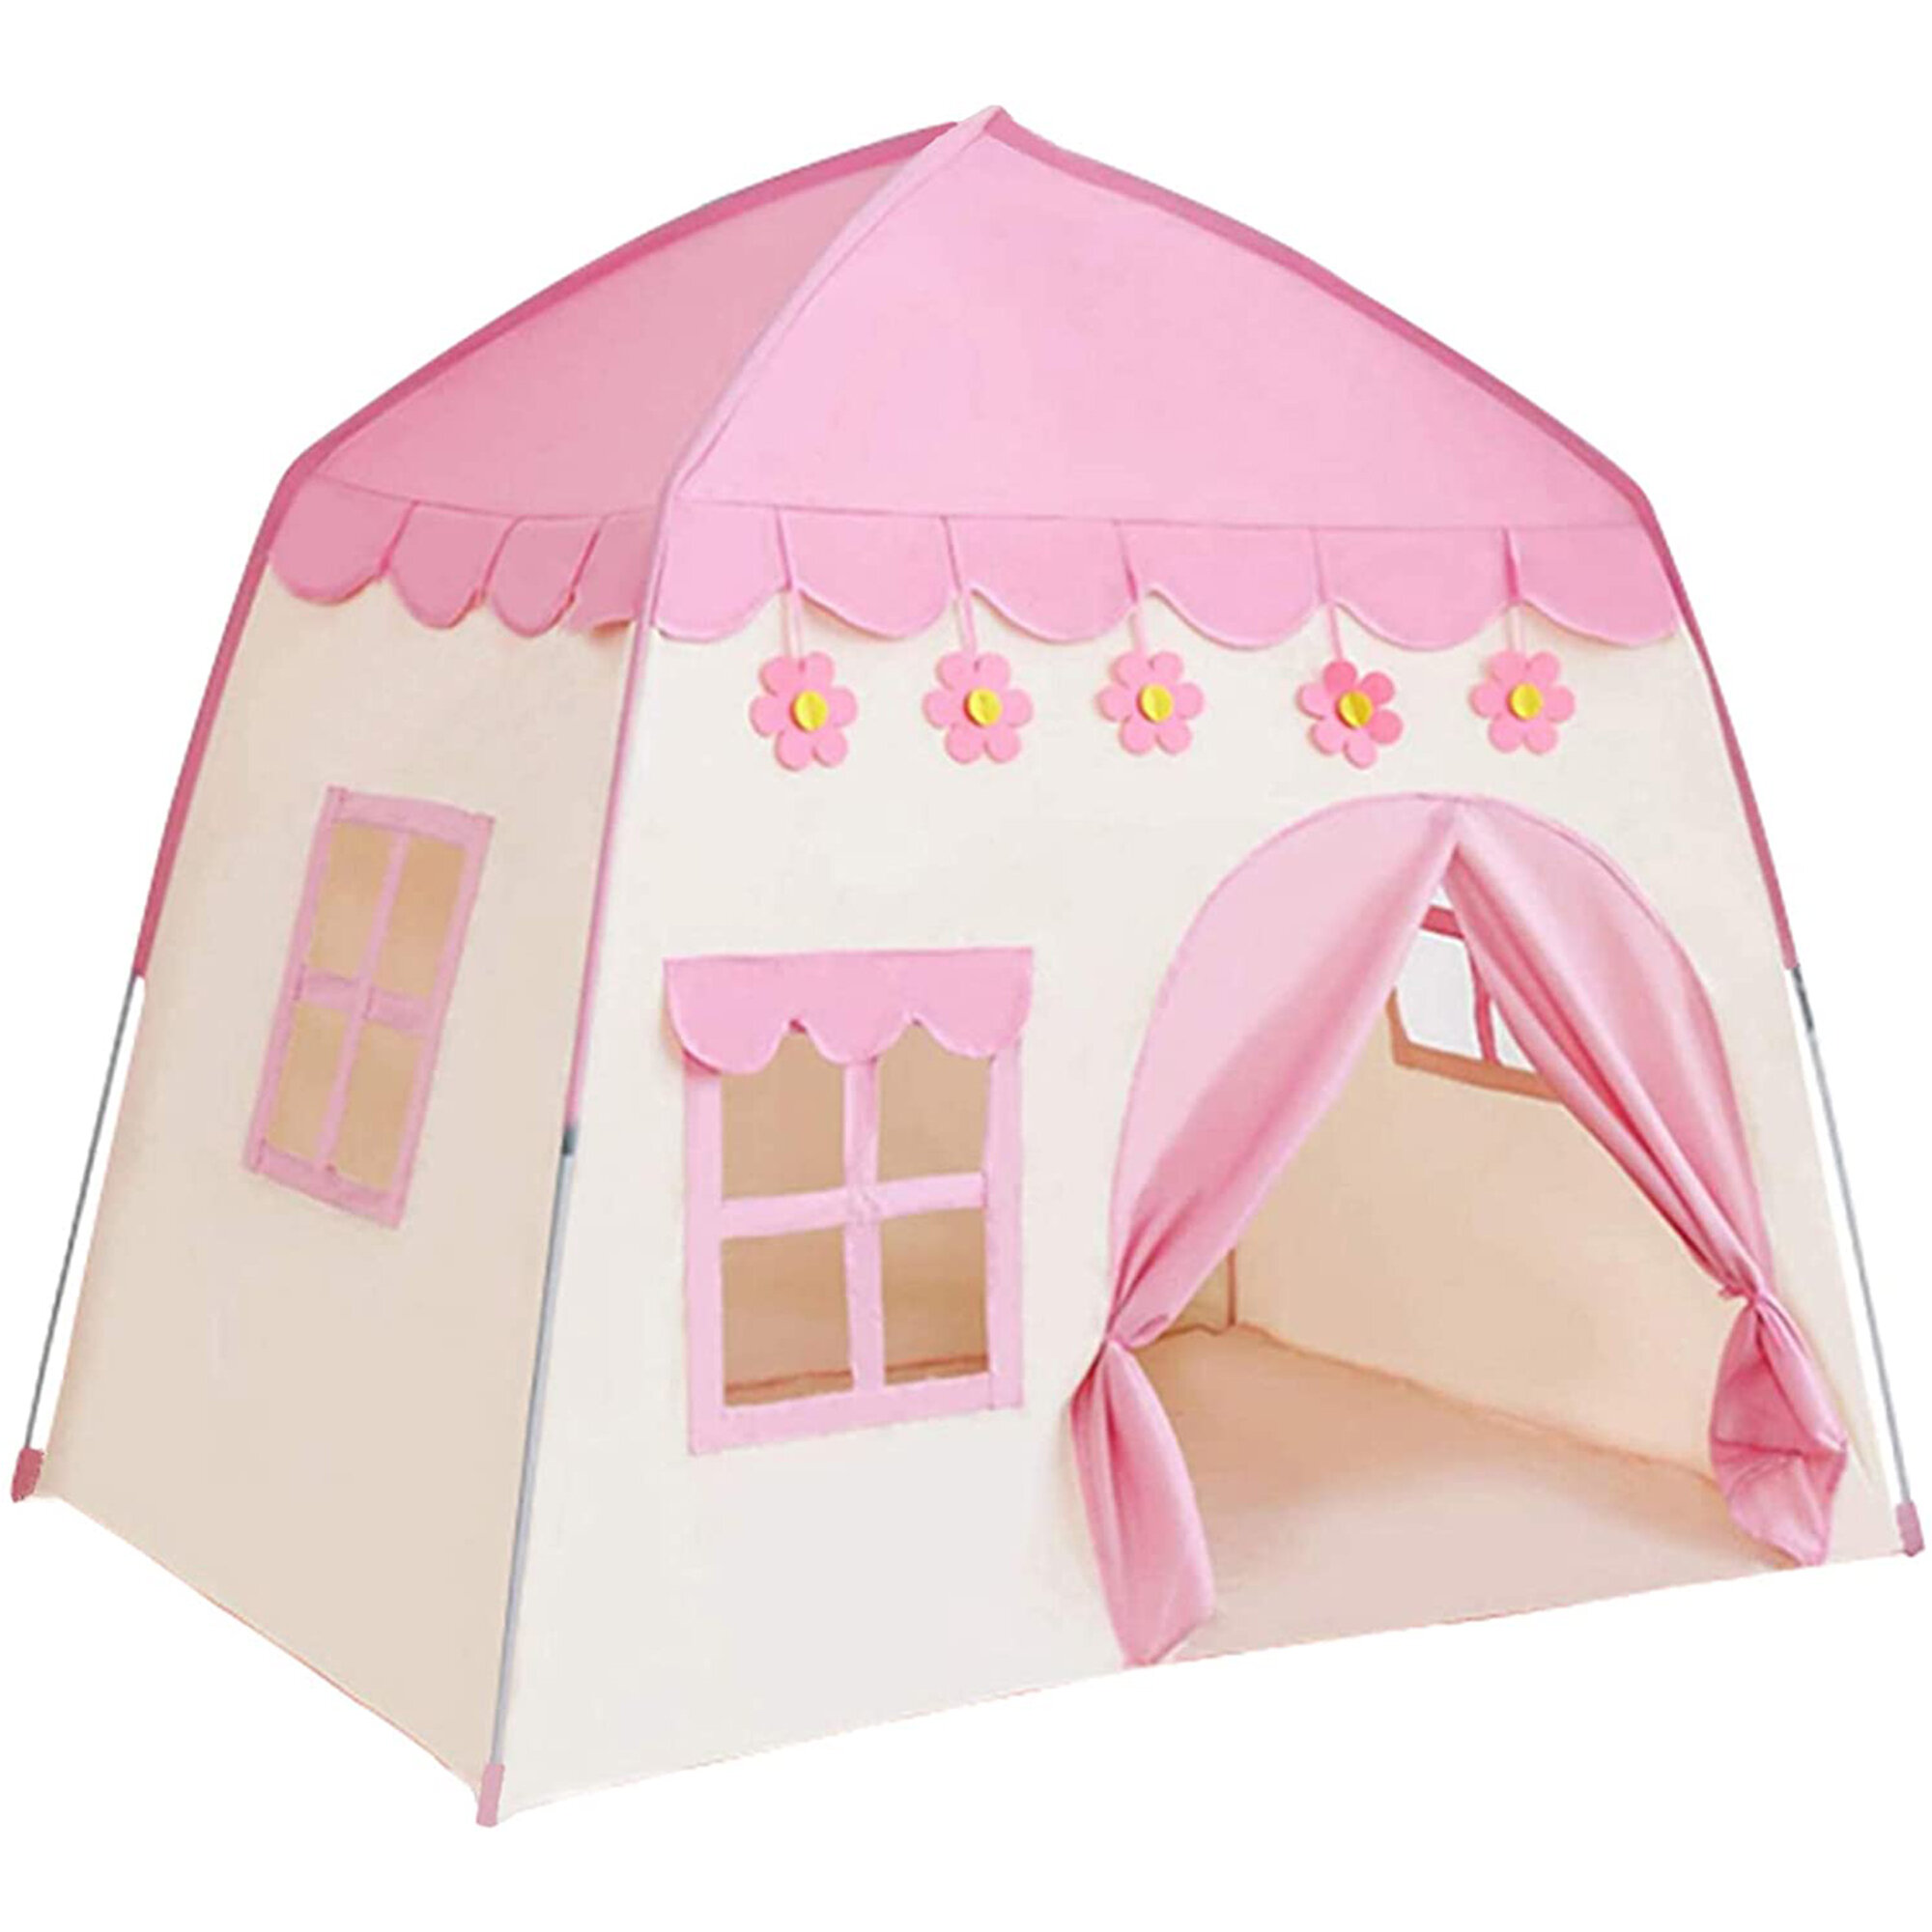 Toys For Girls Kids Children Play Tent House for 3 4 5 6 7 8 9 10 Years Olds Age 